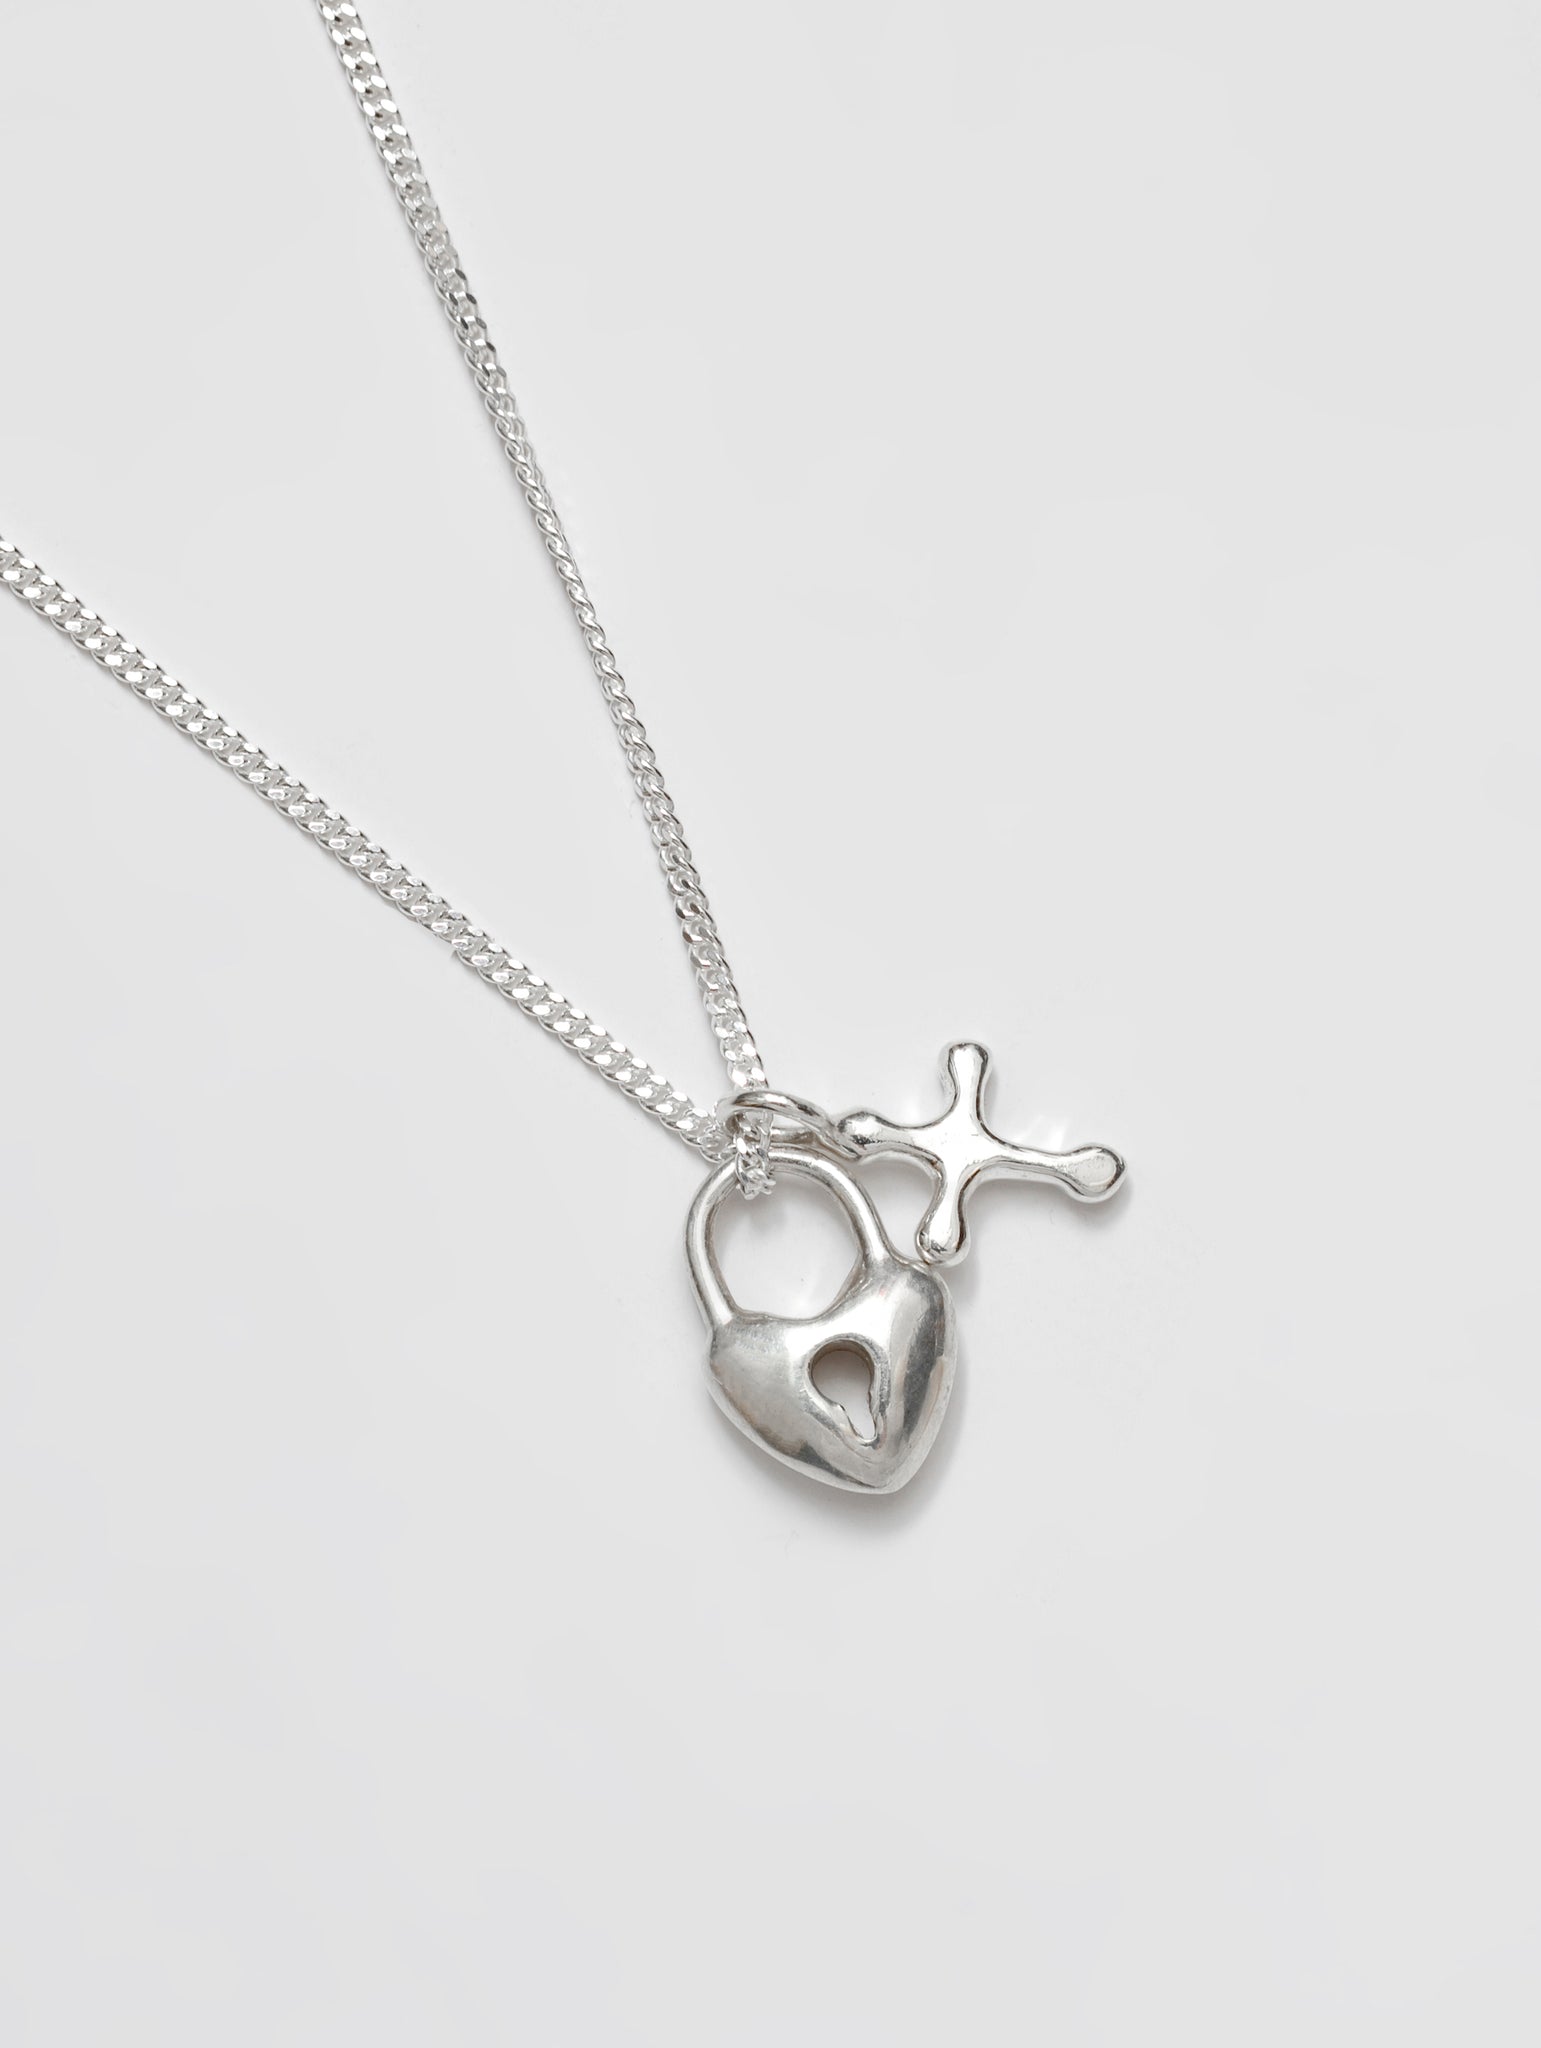 Wolf Circus Mini Heart Lock and Cross Charm Pendant Necklace in Sterling Silver-Necklaces-wolfcircus.com